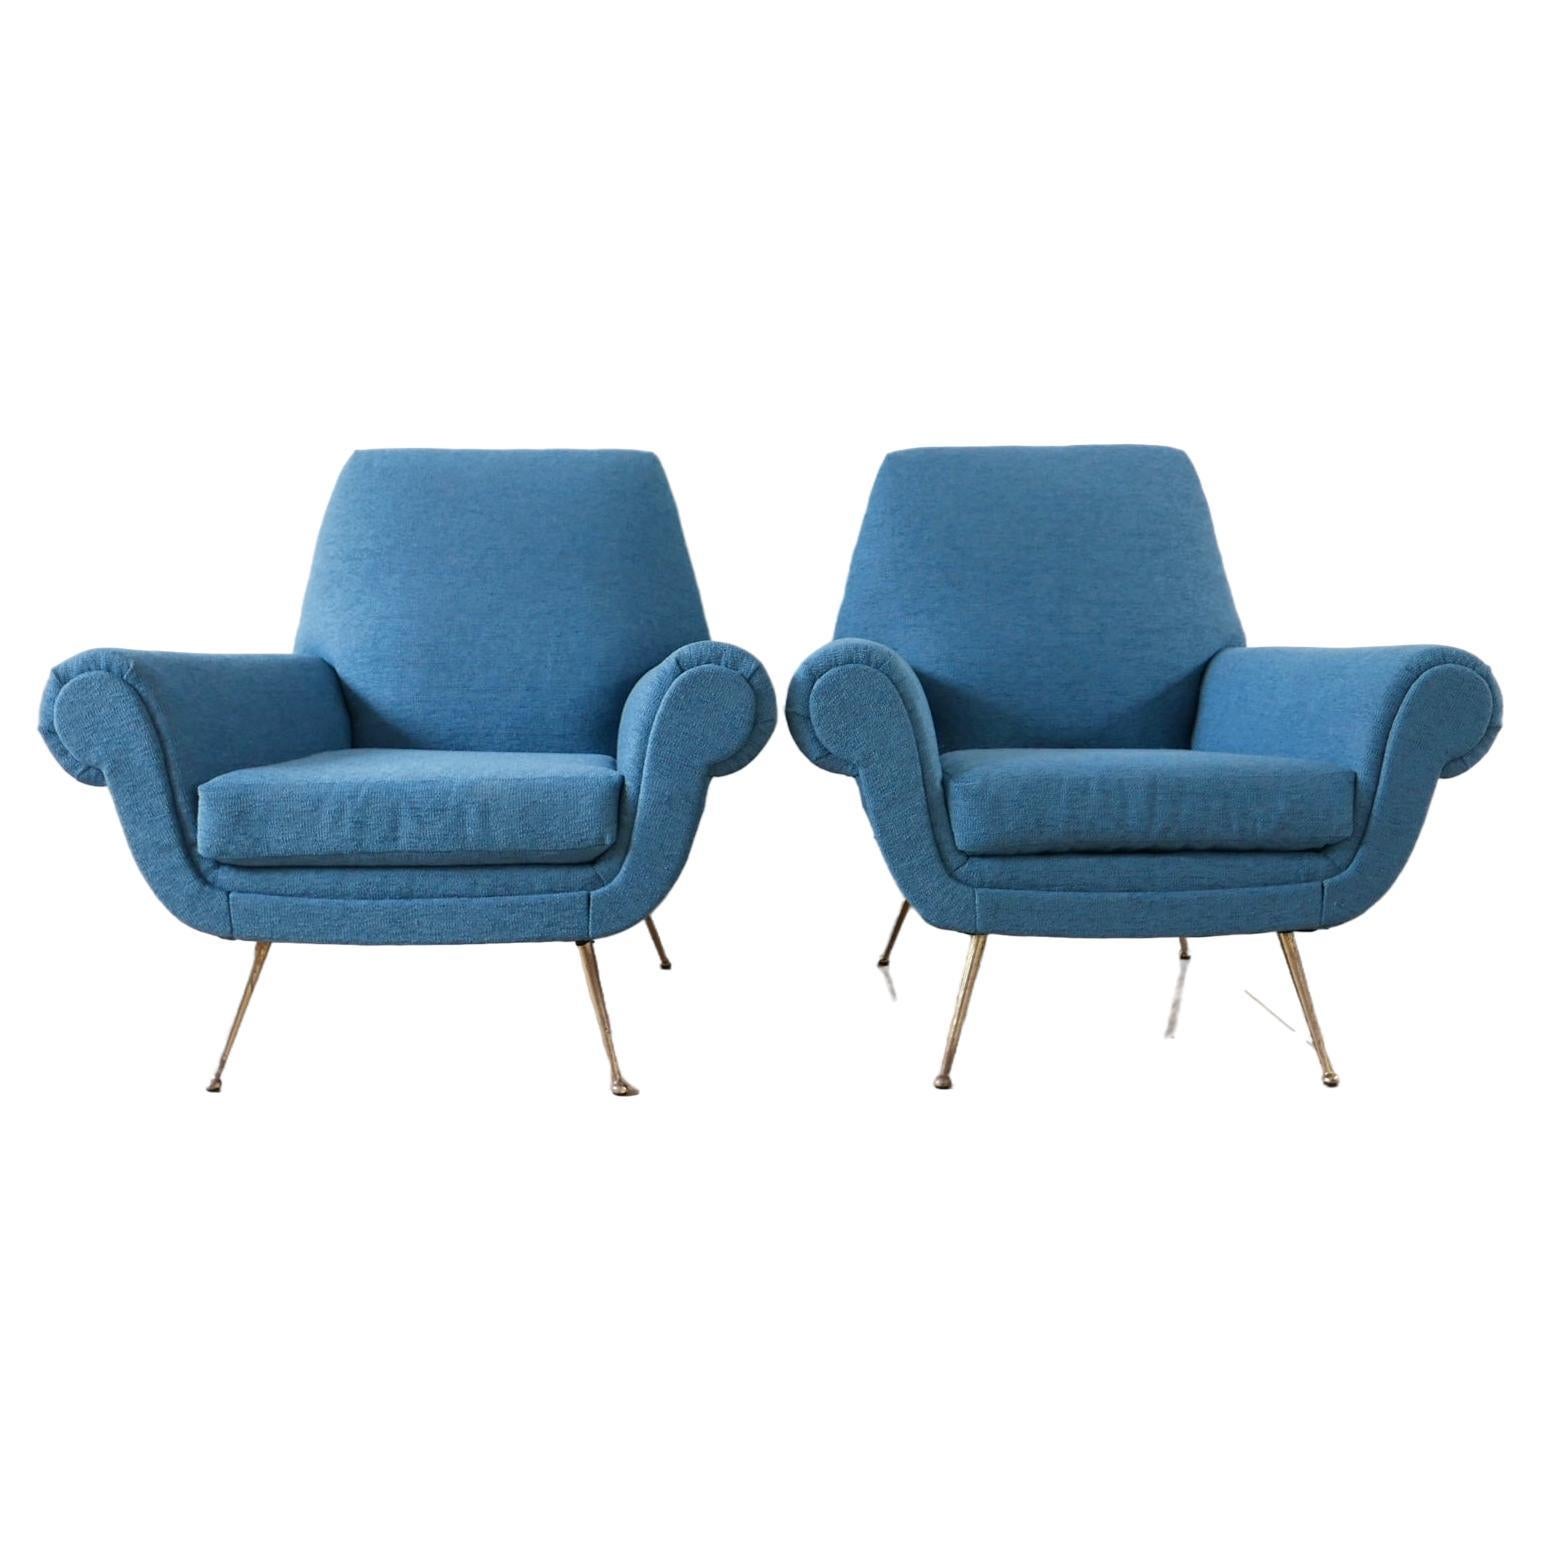 Pair of Newly Upholstered Italian Mid-Century Armchairs For Sale